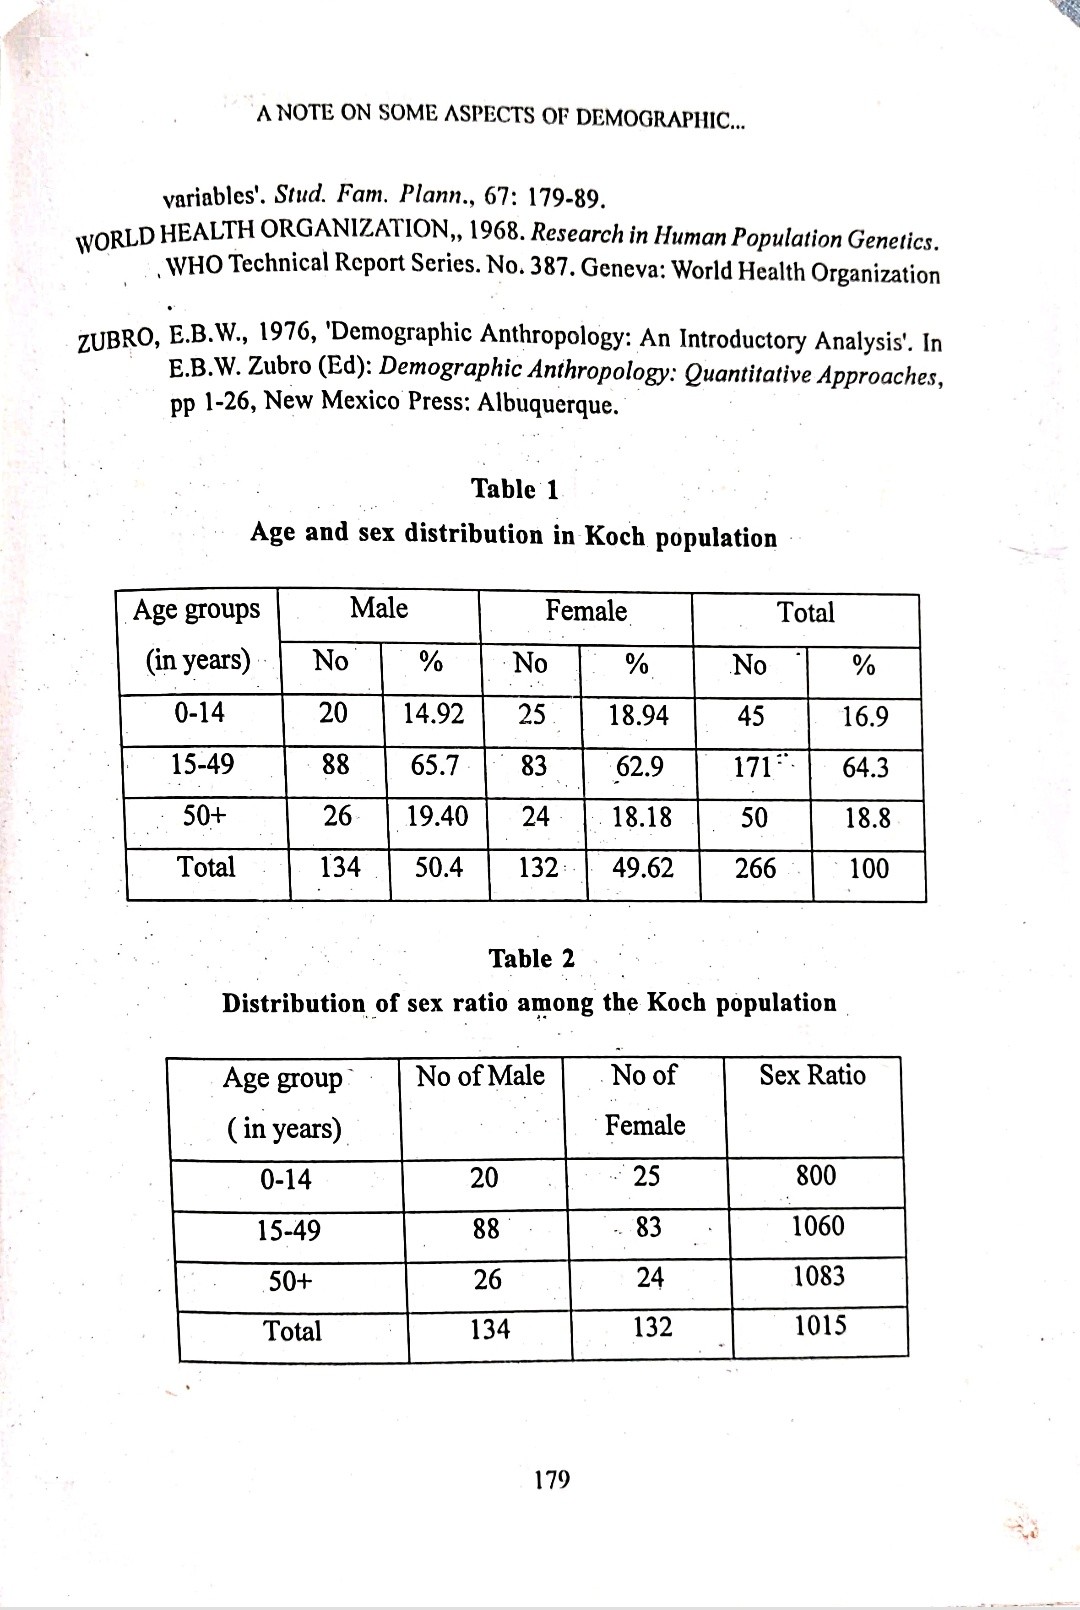 Demographic-variables-among-the-Koch-population-of-Lakhimpur-District-Assam